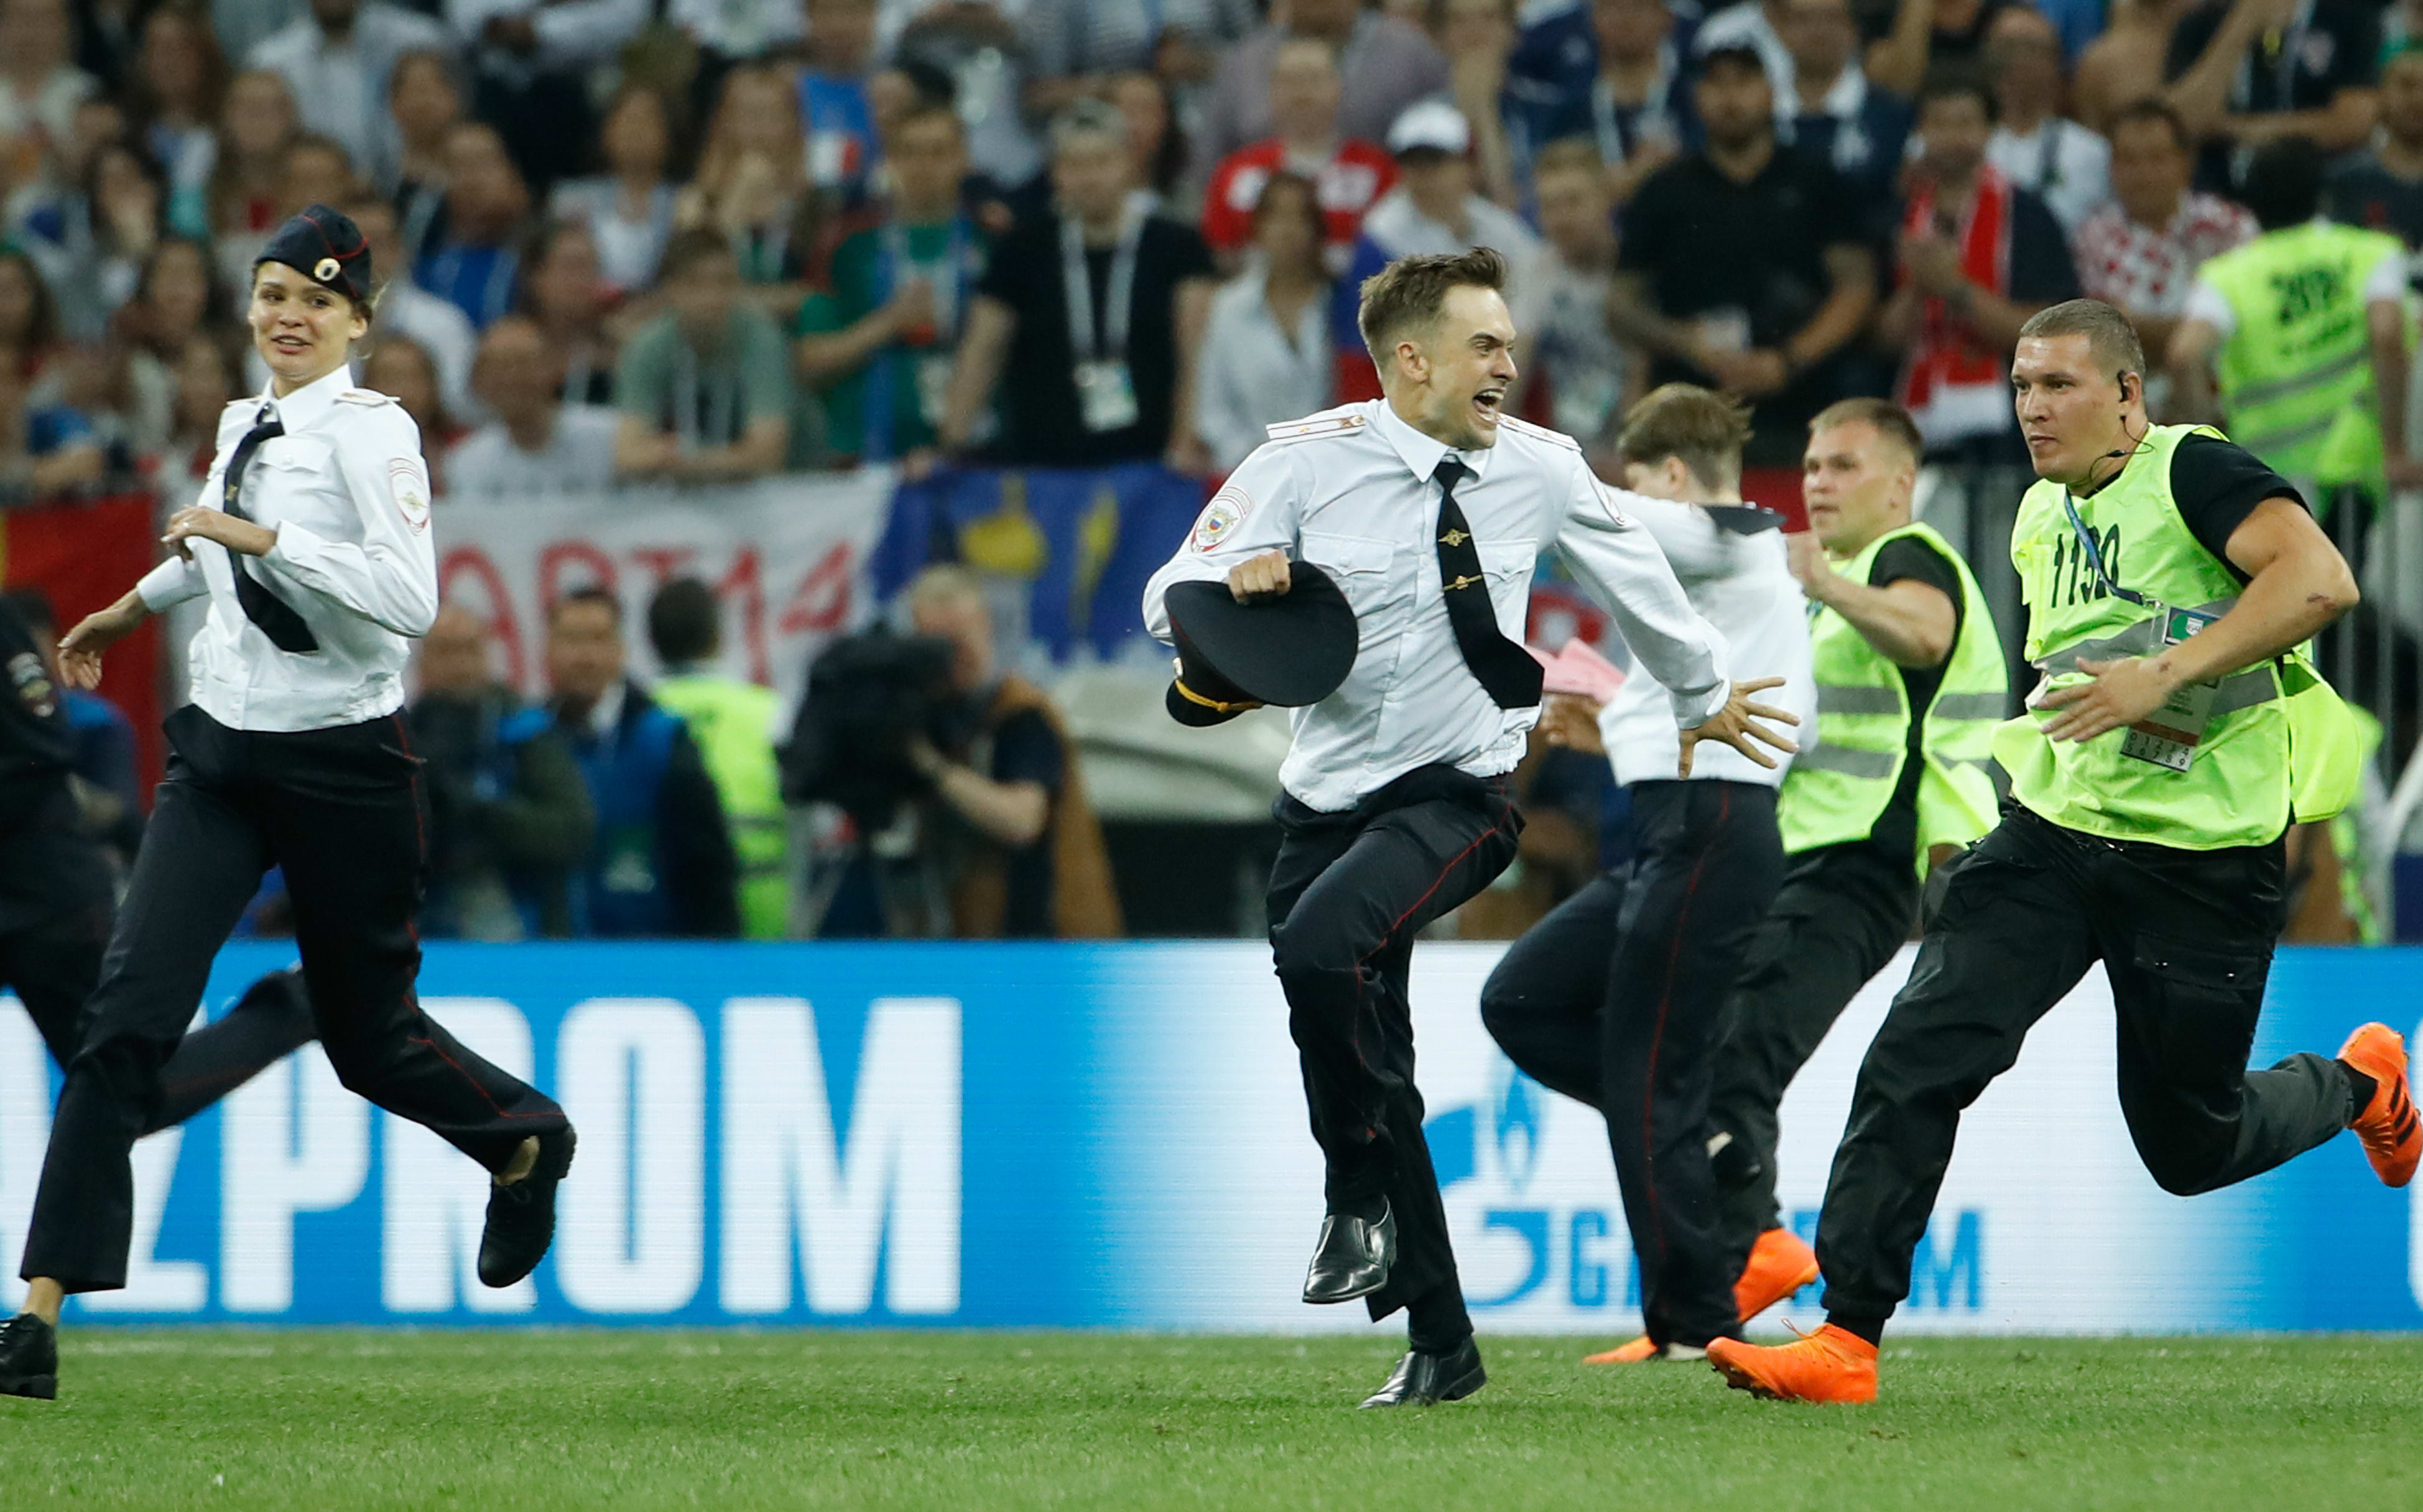 Stewards remove pitch invaders during the Russia 2018 World Cup final football match between France and Croatia at the Luzhniki Stadium in Moscow on July 15, 2018.